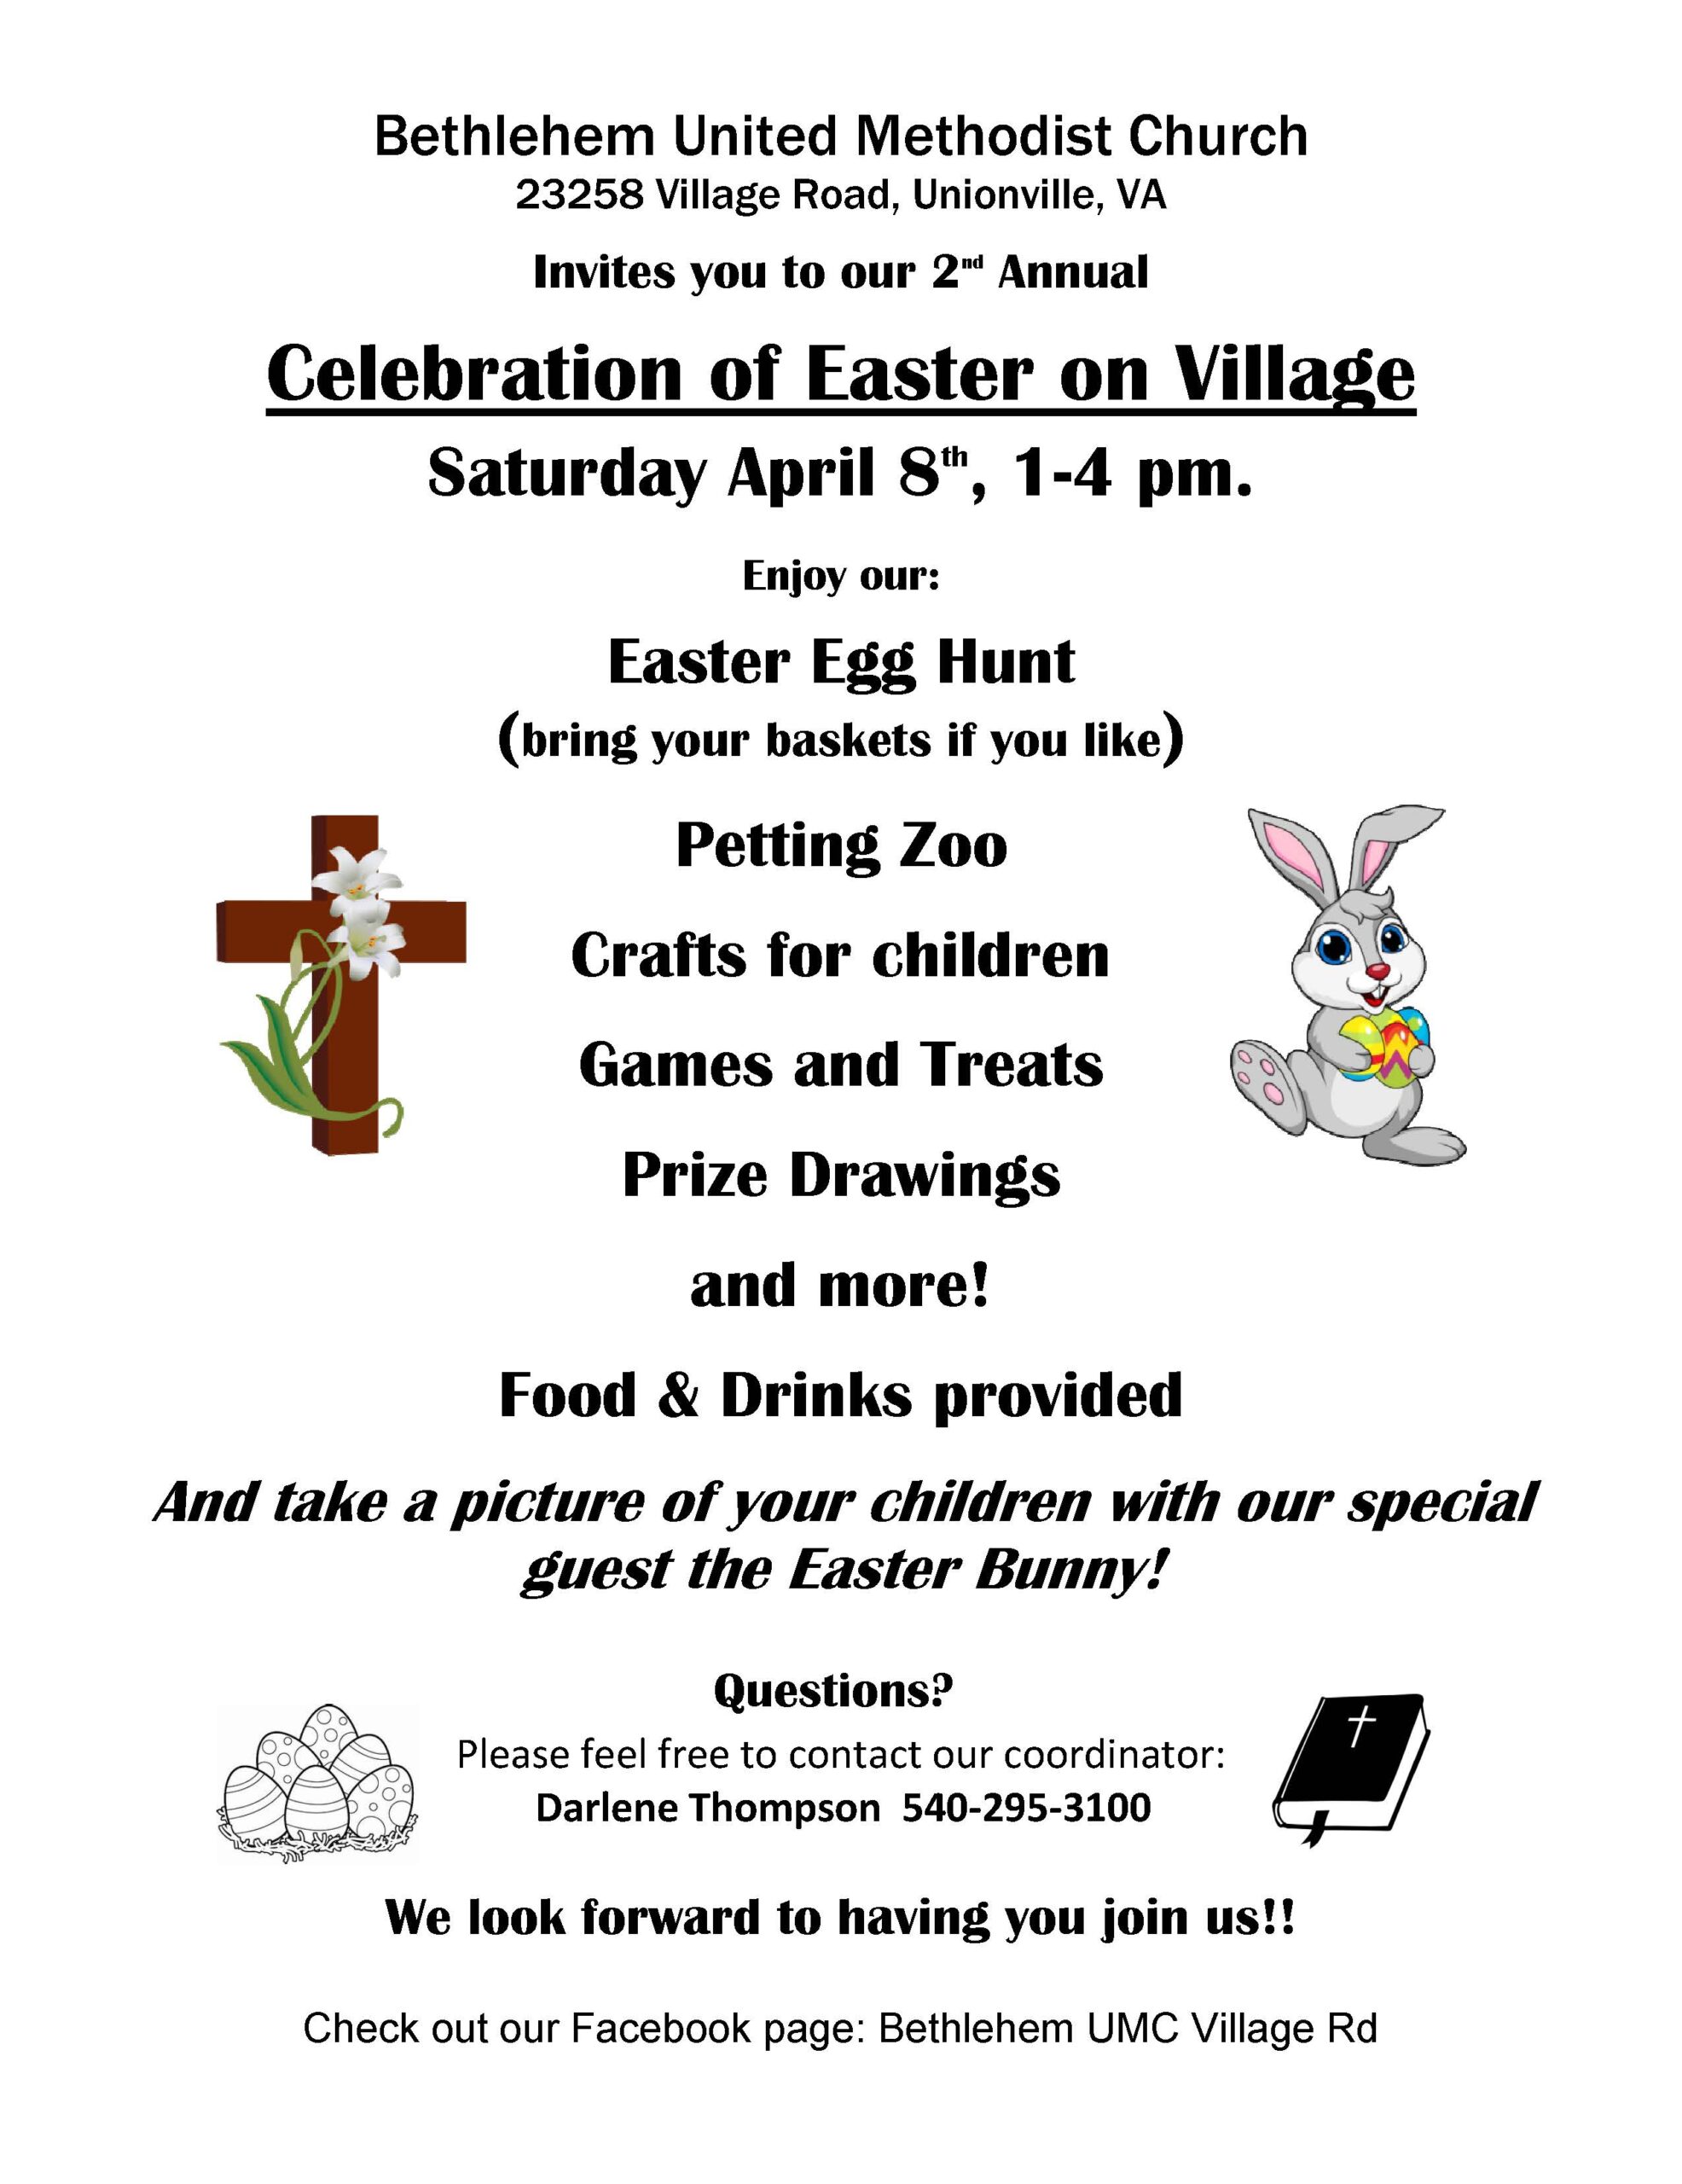 <h1 class="tribe-events-single-event-title">Bethlehem United Methodist Church Celebration of Easter on Village</h1>